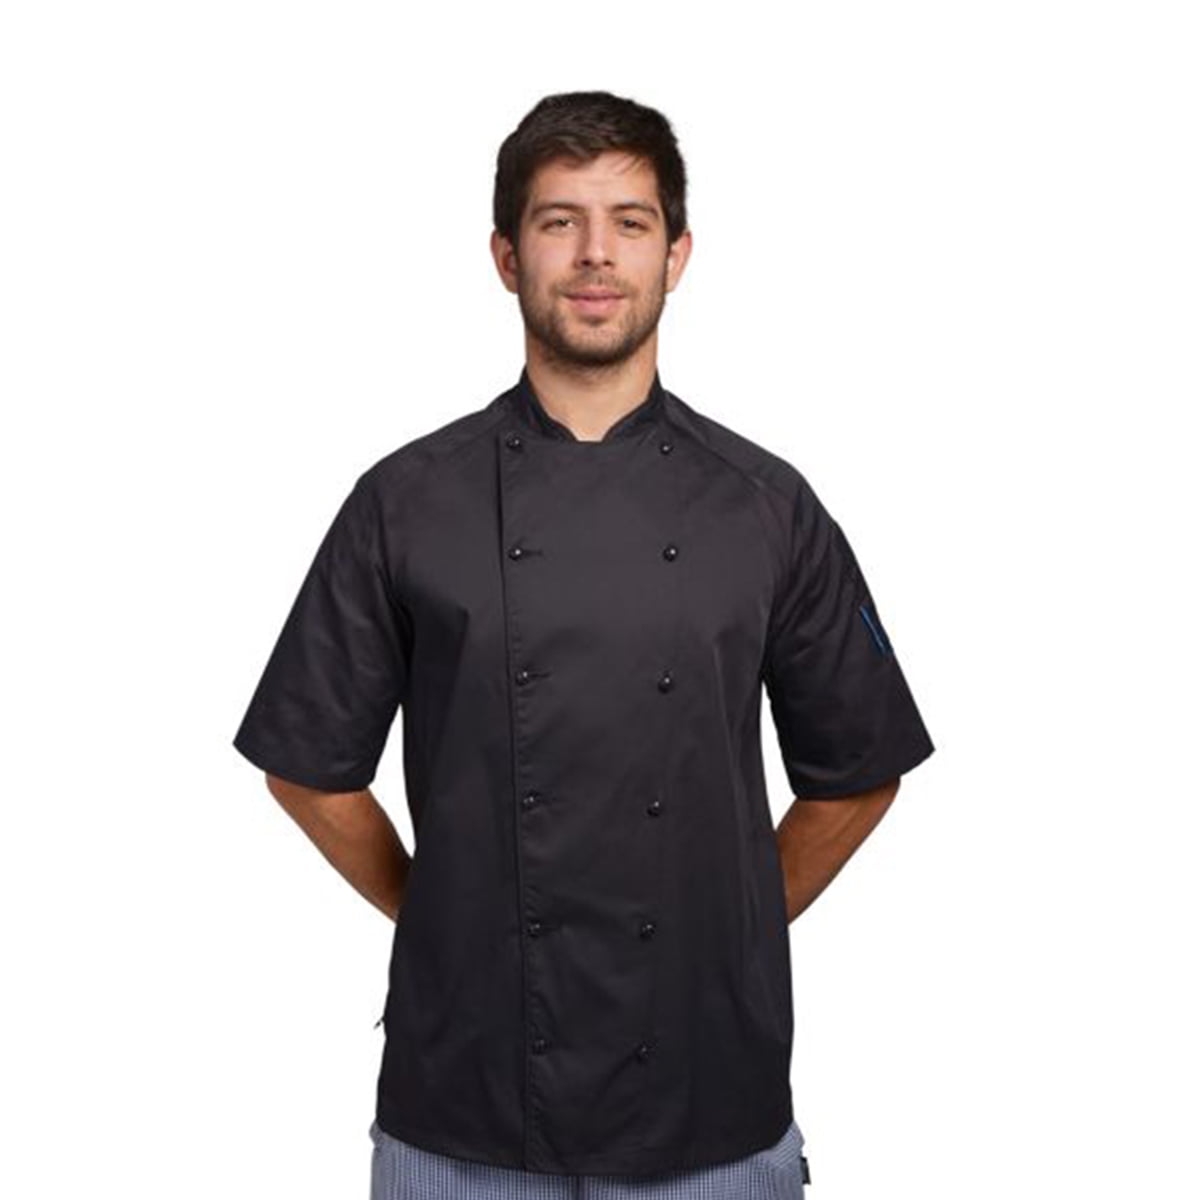 AFD White or Black Chefs Jacket with Removable Studs Thermo°Cool back panel 